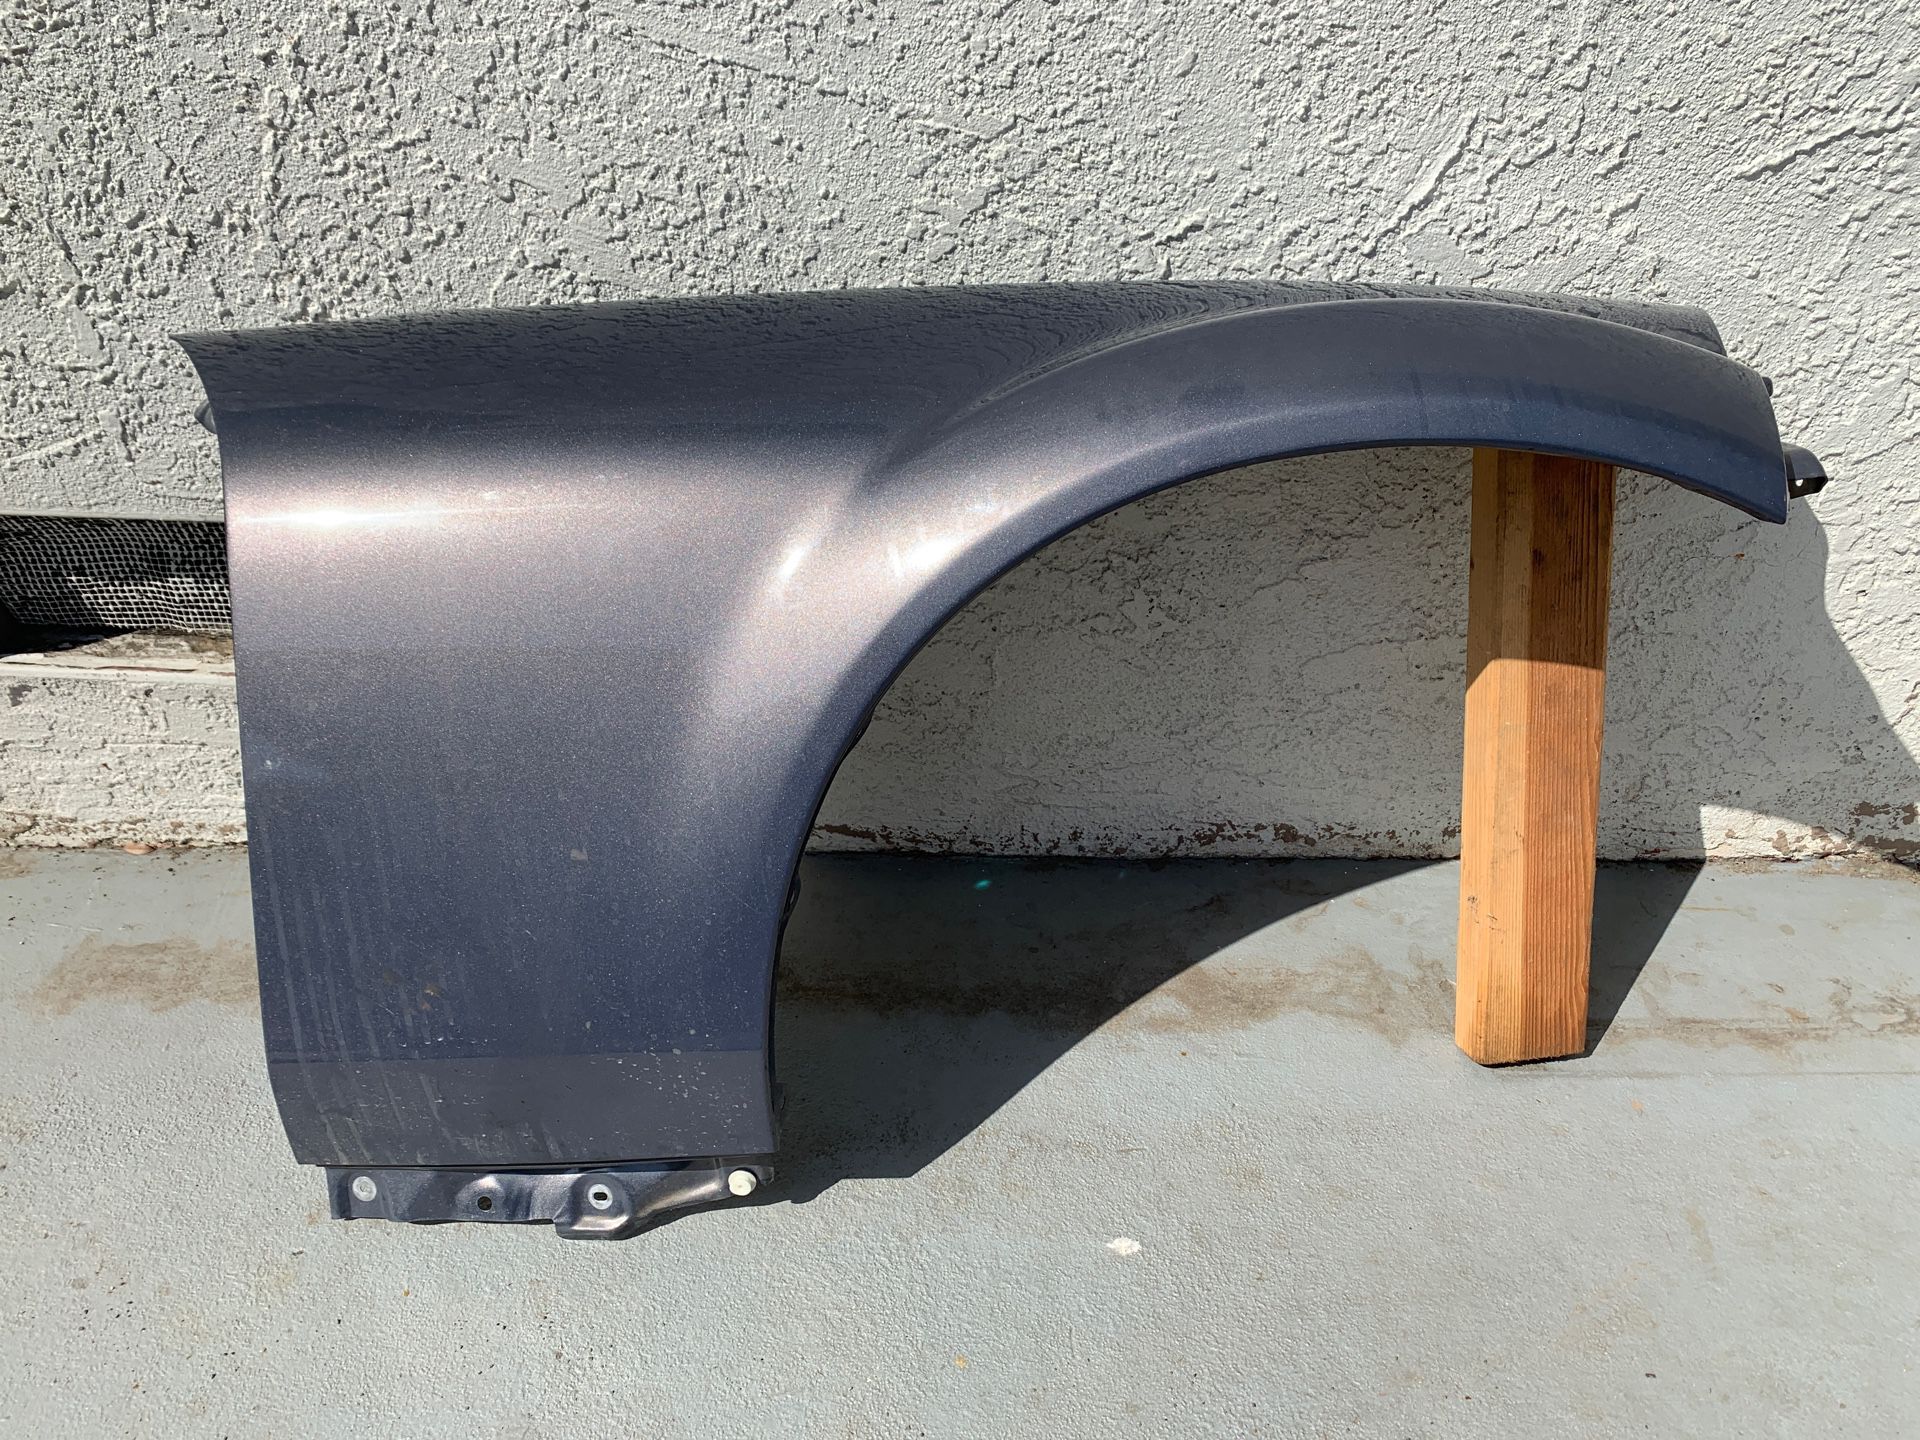 This is a right fender for a 2008 Mazda Miata MX5.